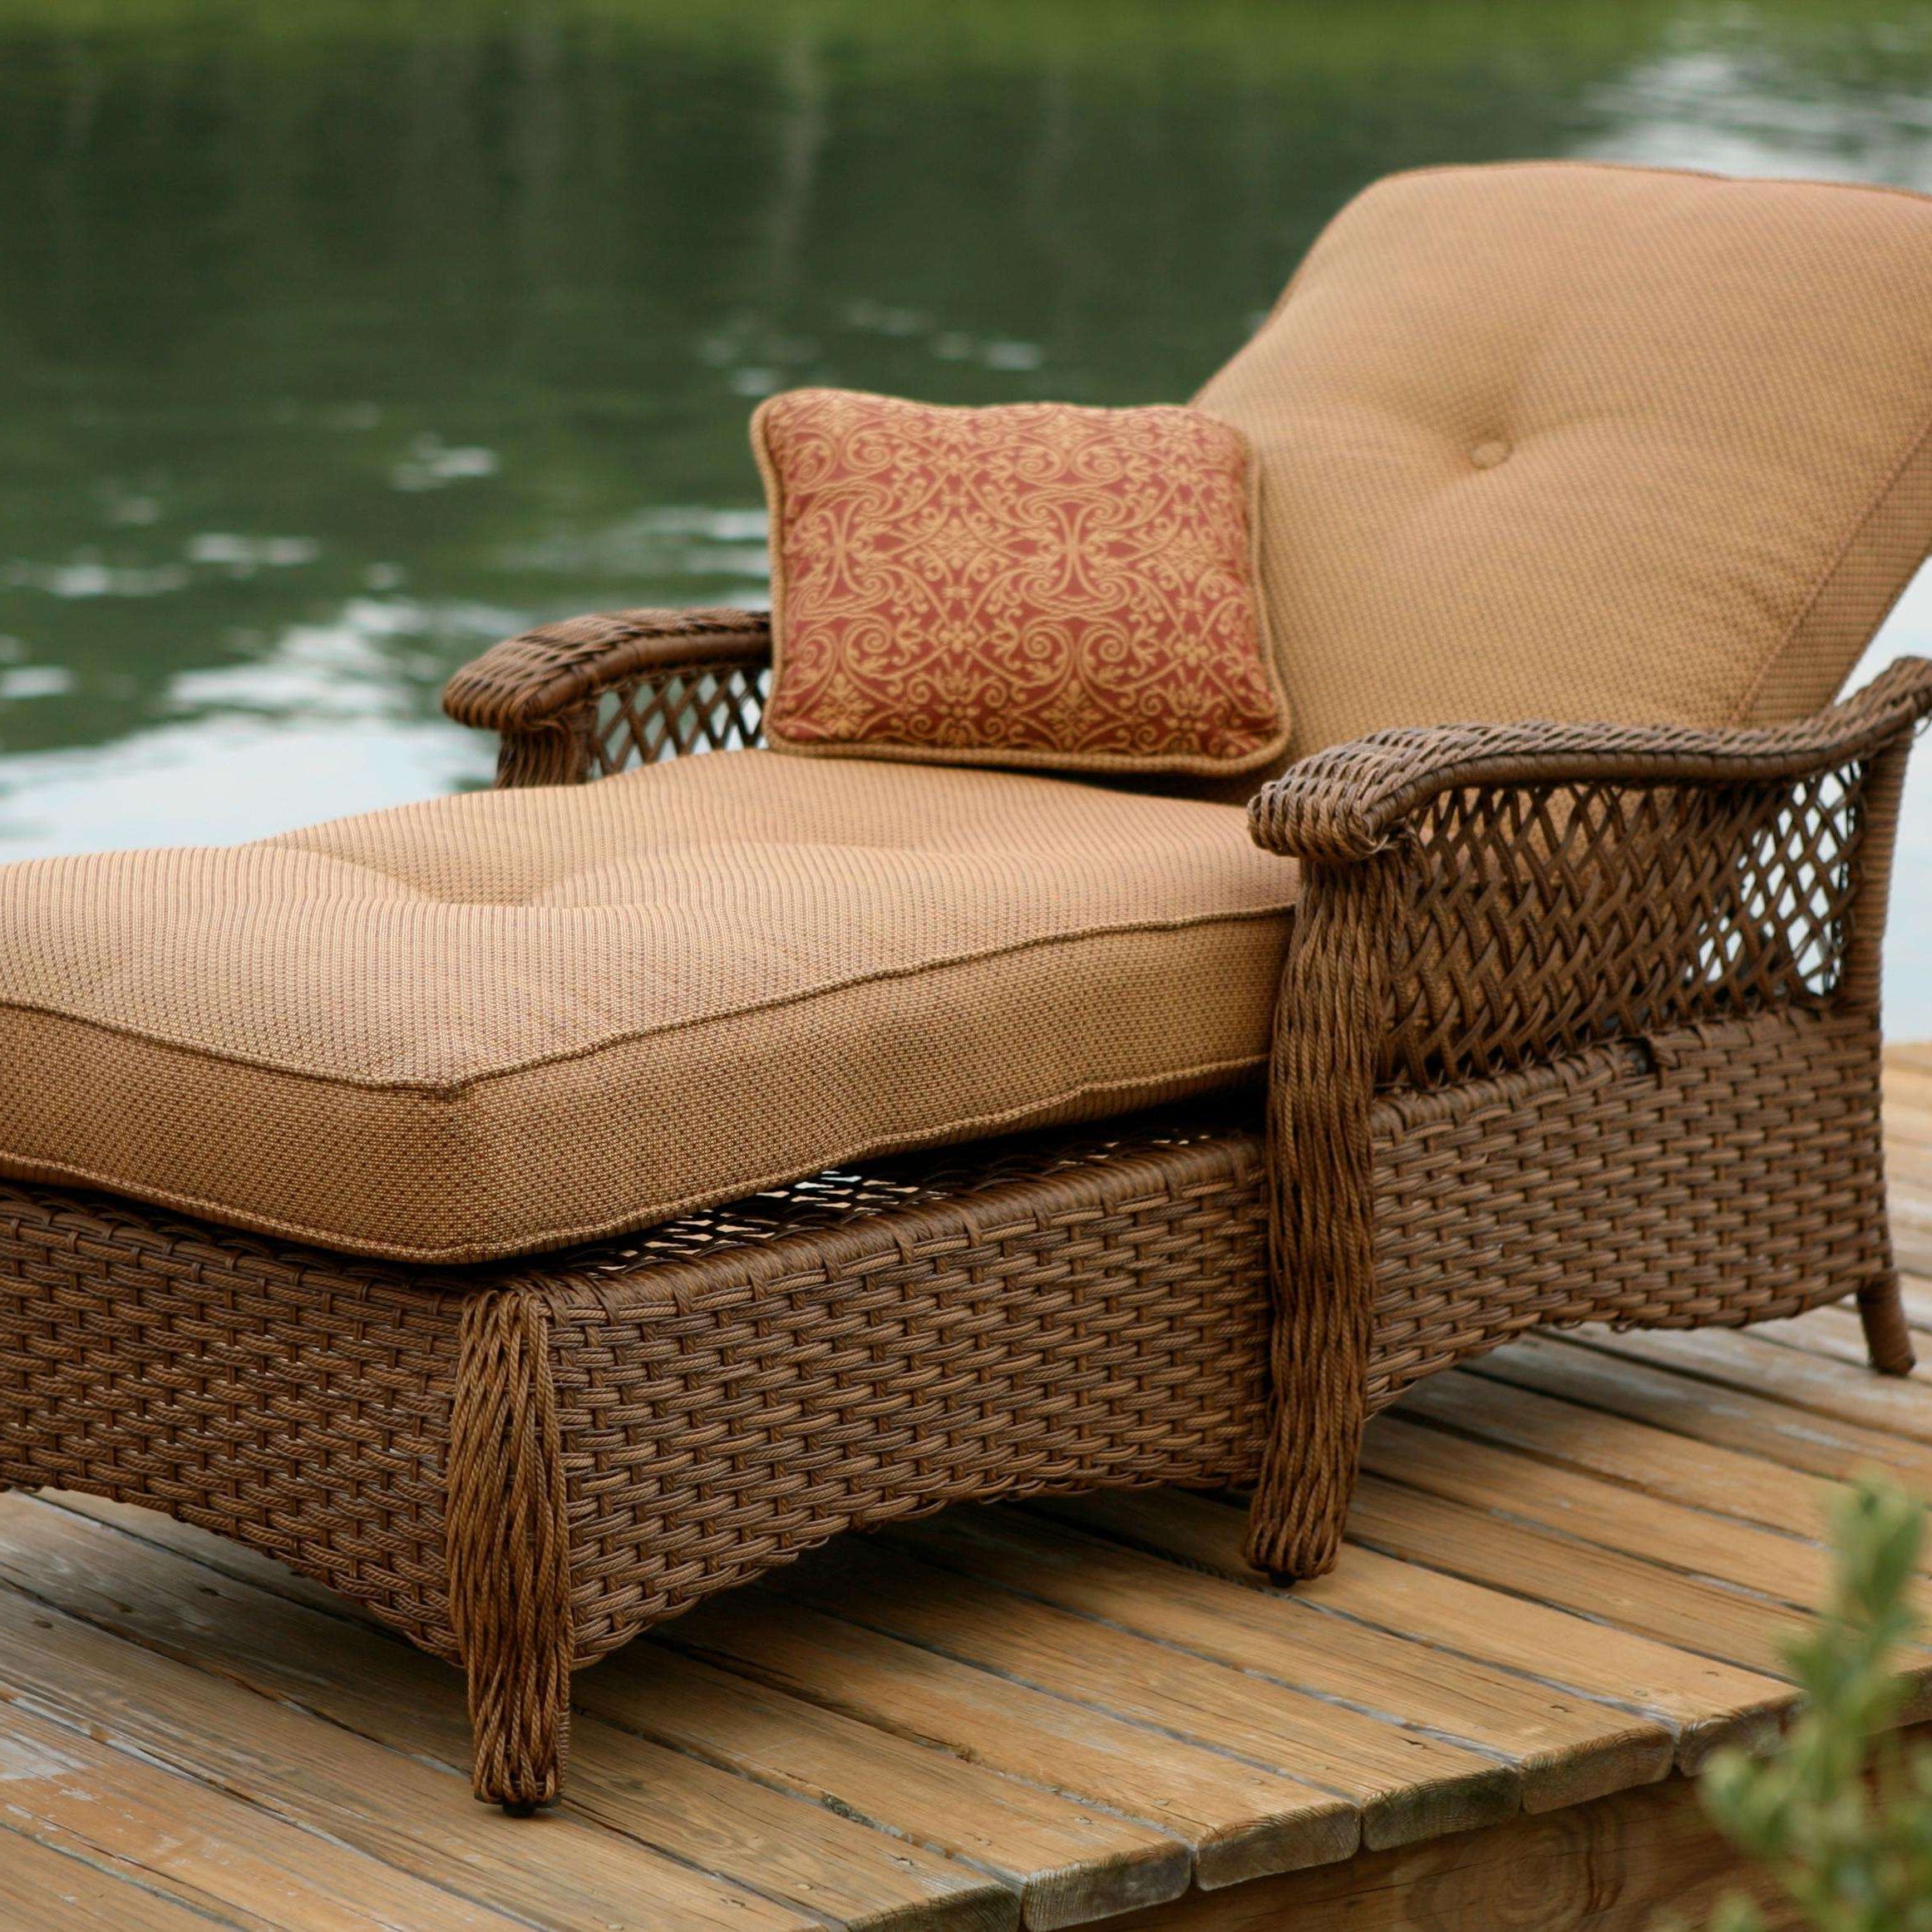 Extra Wide Outdoor Lounge Chairs Intended For Most Recently Released Wonderful Wide Lounge Chair Outdoor Extra Chaise Chairs (View 11 of 25)